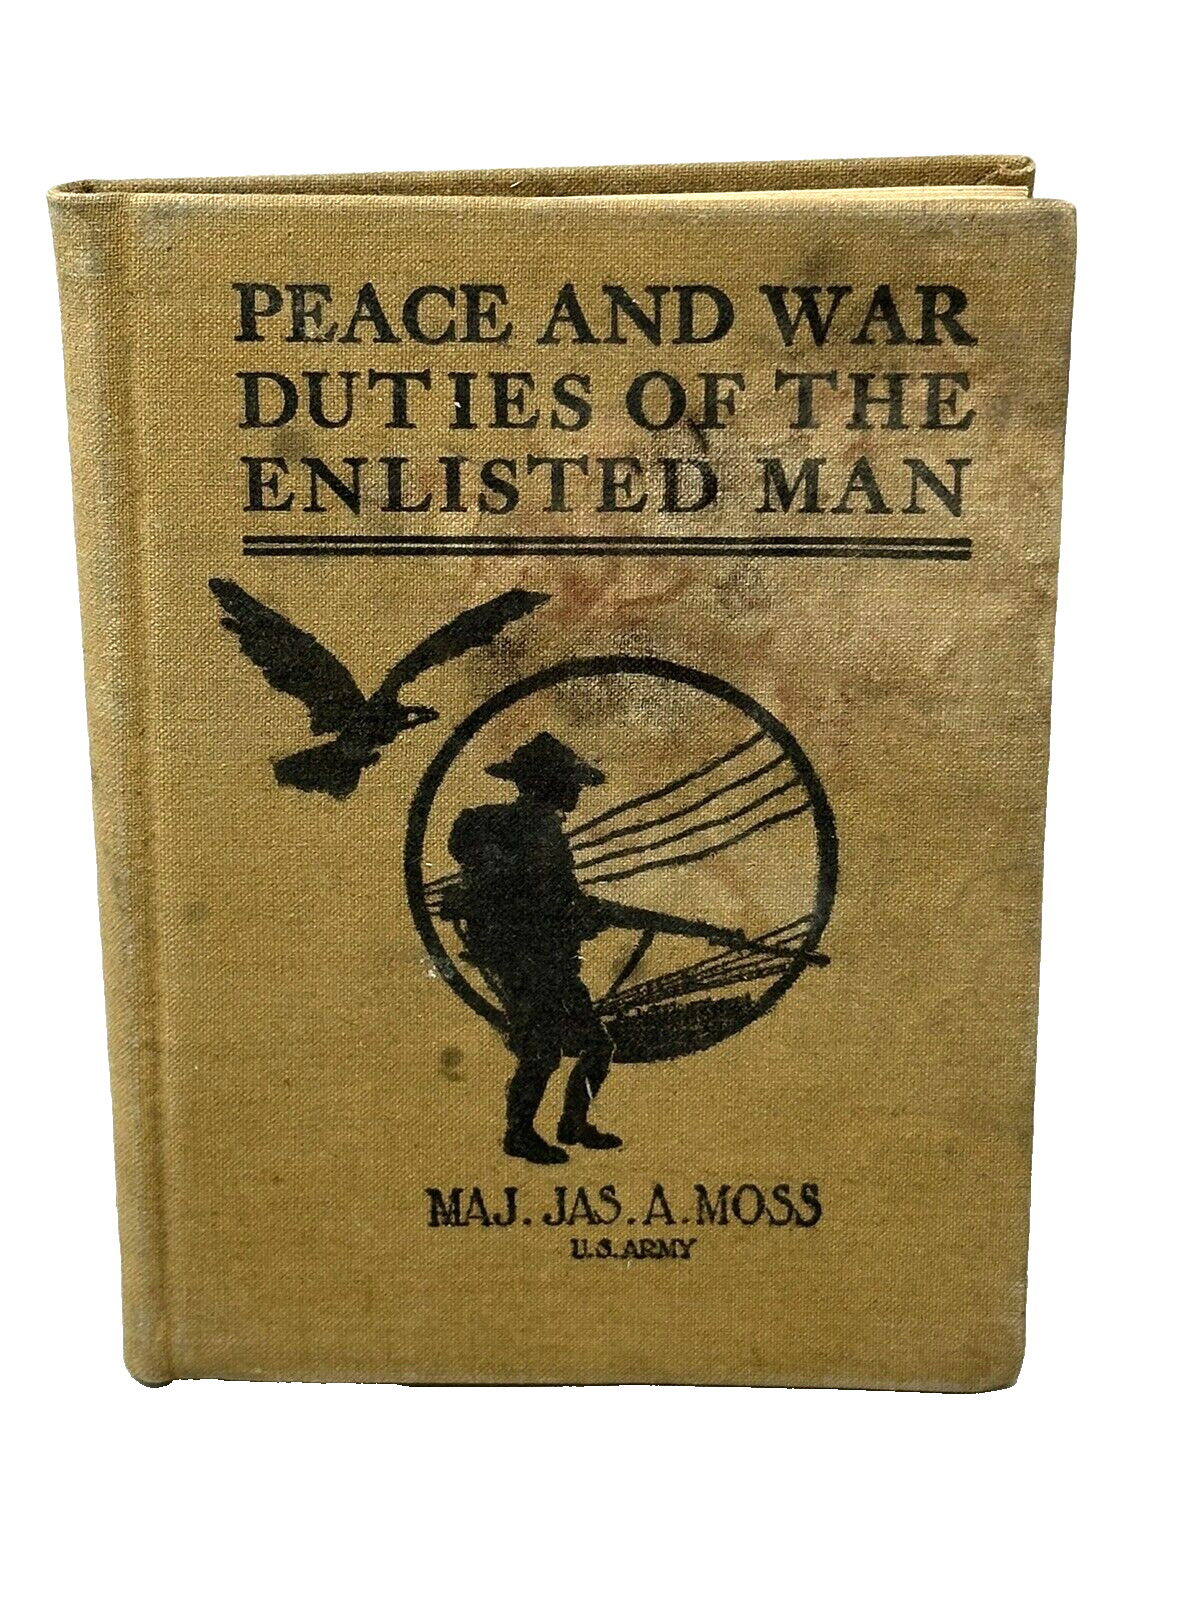 1917 PEACE AND WAR DUTIES OF THE ENLISTED MAN Major Jason Moss WWI US Army HC